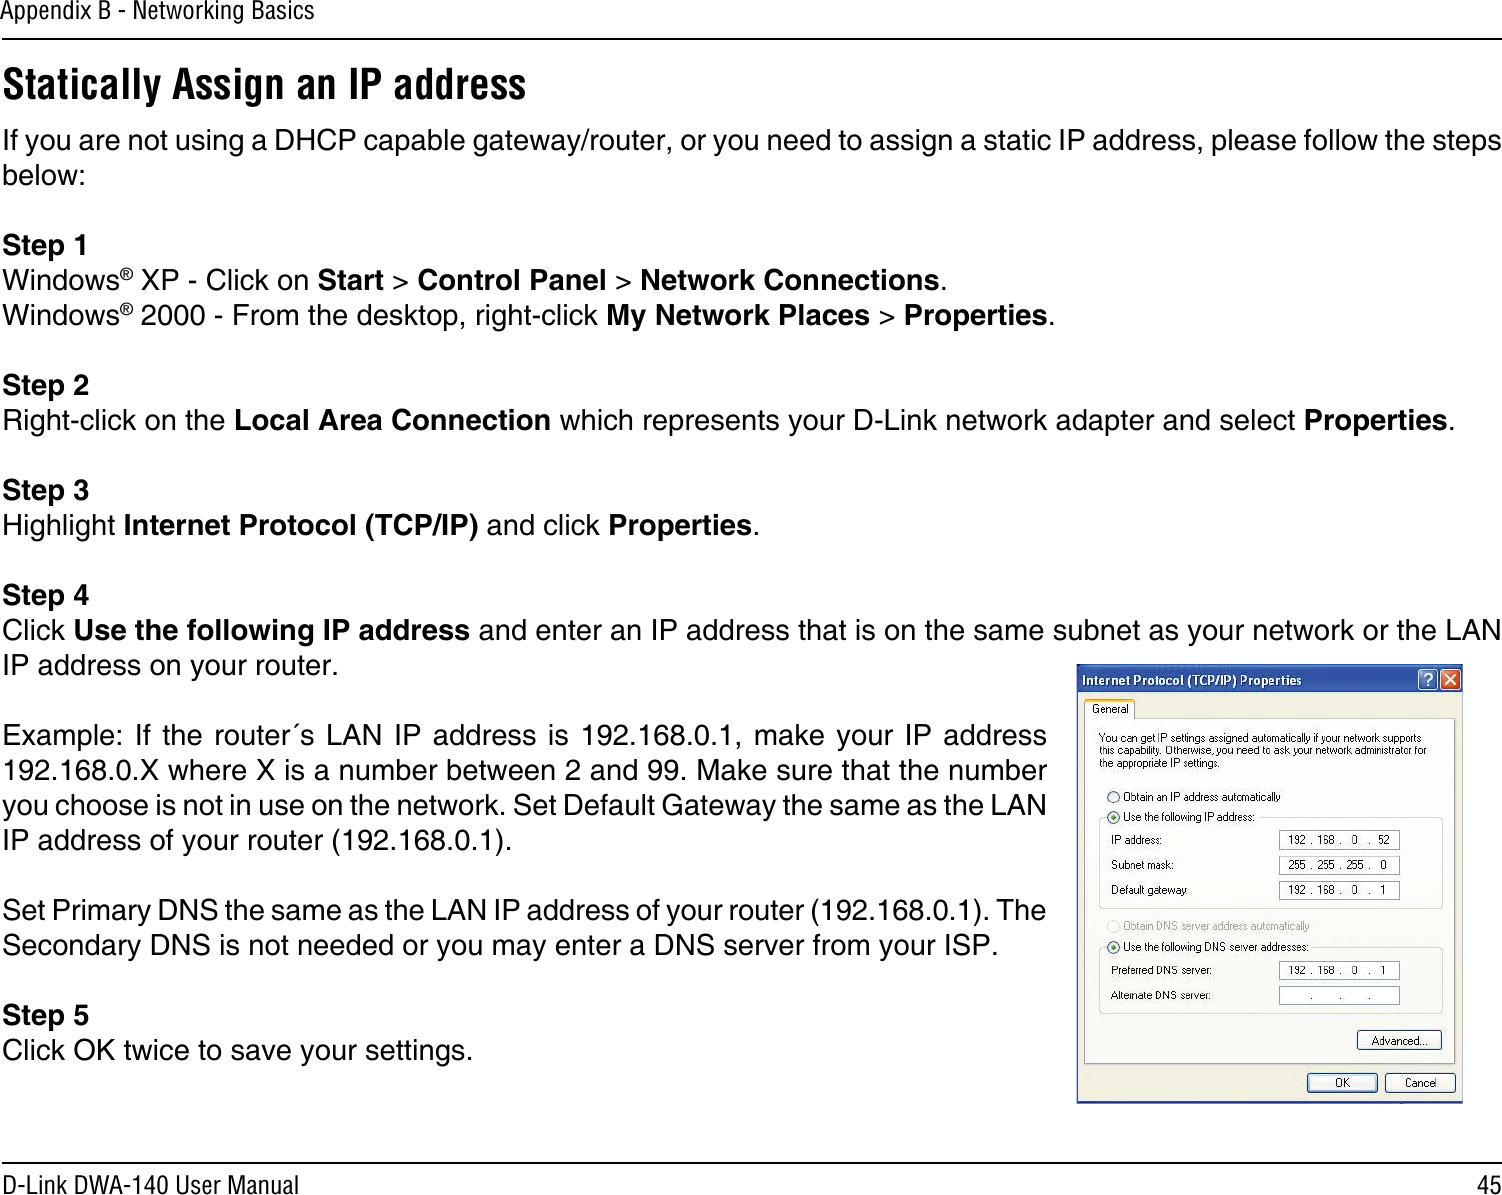 45D-Link DWA-140 User ManualAppendix B - Networking BasicsStatically Assign an IP addressIf you are not using a DHCP capable gateway/router, or you need to assign a static IP address, please follow the steps below:Step 1Windows® XP - Click on Start &gt; Control Panel &gt; Network Connections.Windows® 2000 - From the desktop, right-click My Network Places &gt; Properties.Step 2Right-click on the Local Area Connection which represents your D-Link network adapter and select Properties.Step 3Highlight Internet Protocol (TCP/IP) and click Properties.Step 4Click Use the following IP address and enter an IP address that is on the same subnet as your network or the LAN IP address on your router. Example: If the  router´s LAN  IP address is  192.168.0.1, make  your IP  address 192.168.0.X where X is a number between 2 and 99. Make sure that the number you choose is not in use on the network. Set Default Gateway the same as the LAN IP address of your router (192.168.0.1). Set Primary DNS the same as the LAN IP address of your router (192.168.0.1). The Secondary DNS is not needed or you may enter a DNS server from your ISP.Step 5Click OK twice to save your settings.